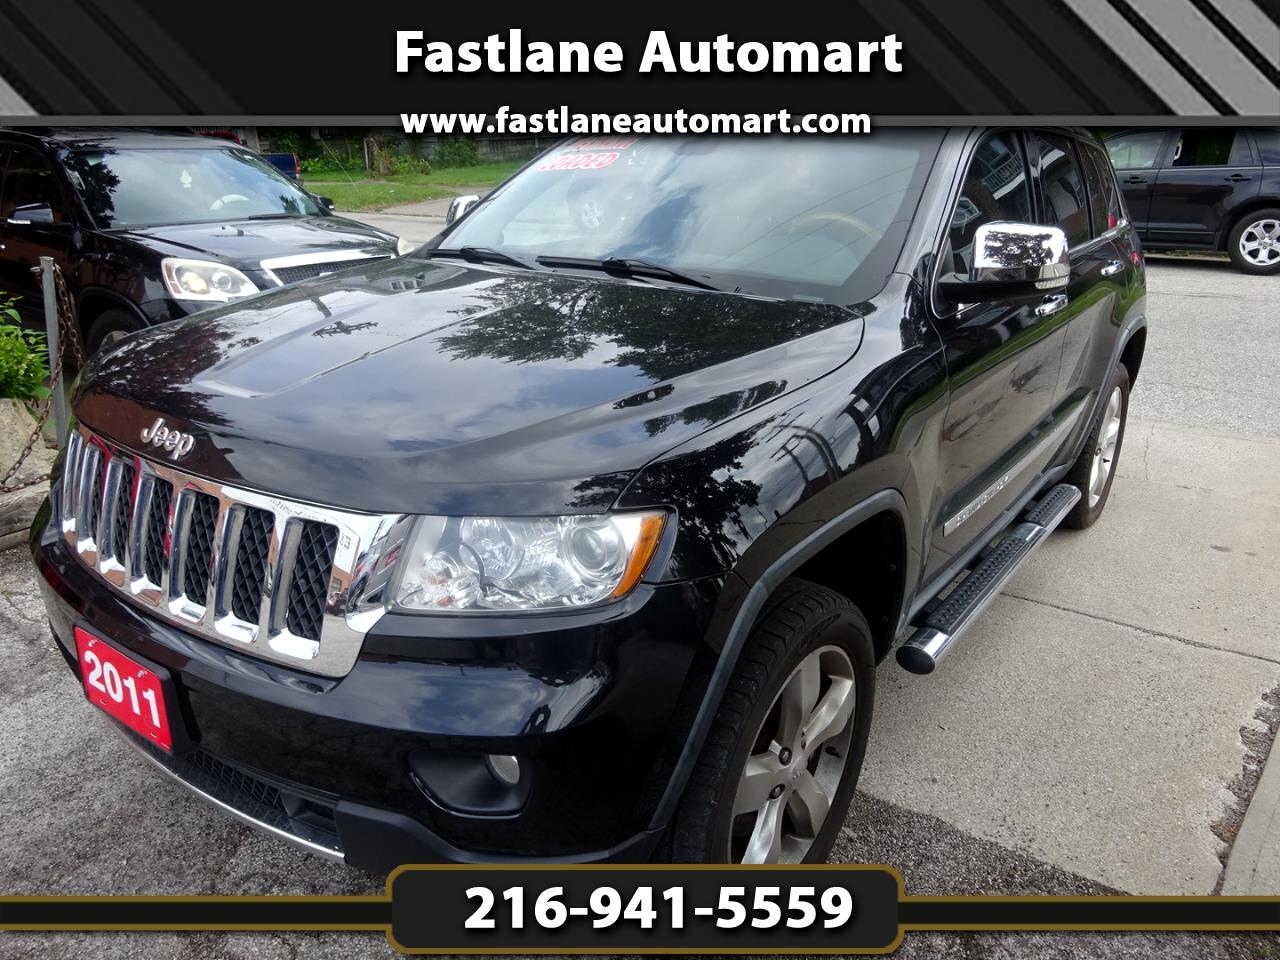 Jeep Grand Cherokee 4WD 4dr Overland 2011